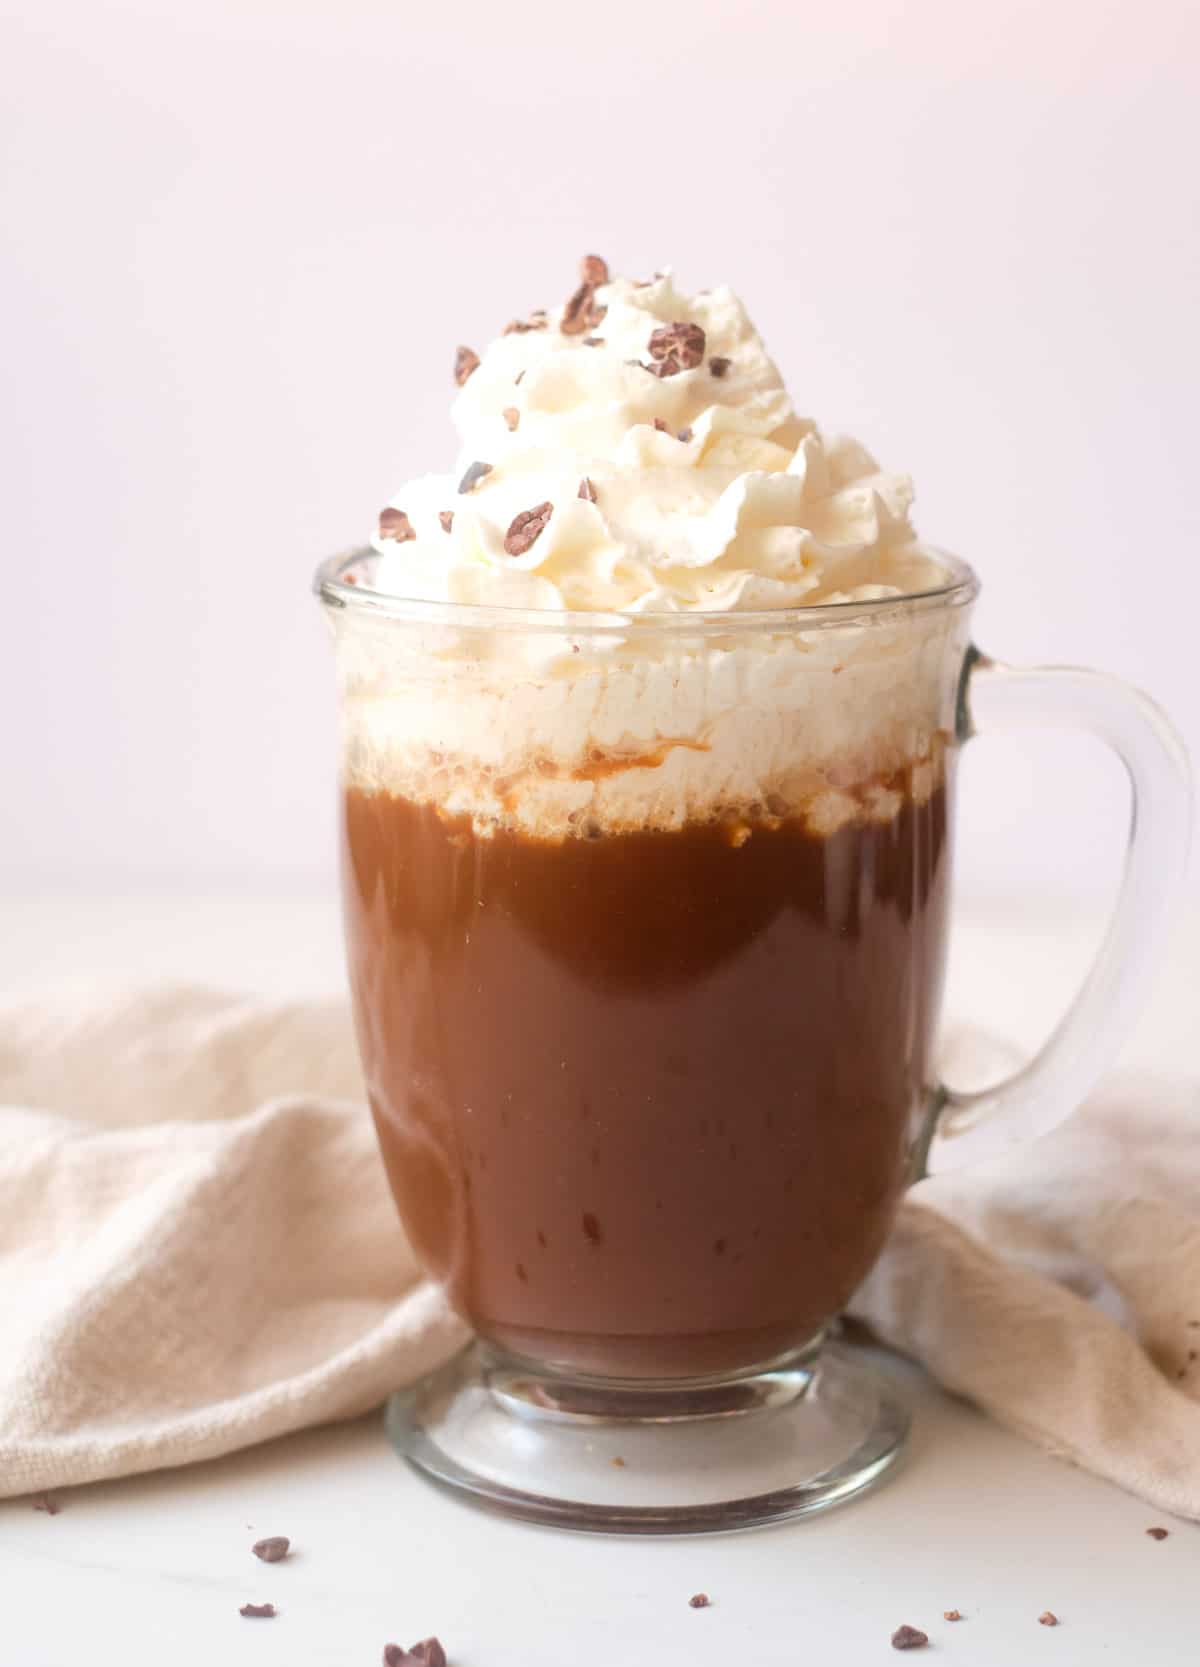 Mocha latte in glass mug topped with whipped cream and chocolate shavings. 